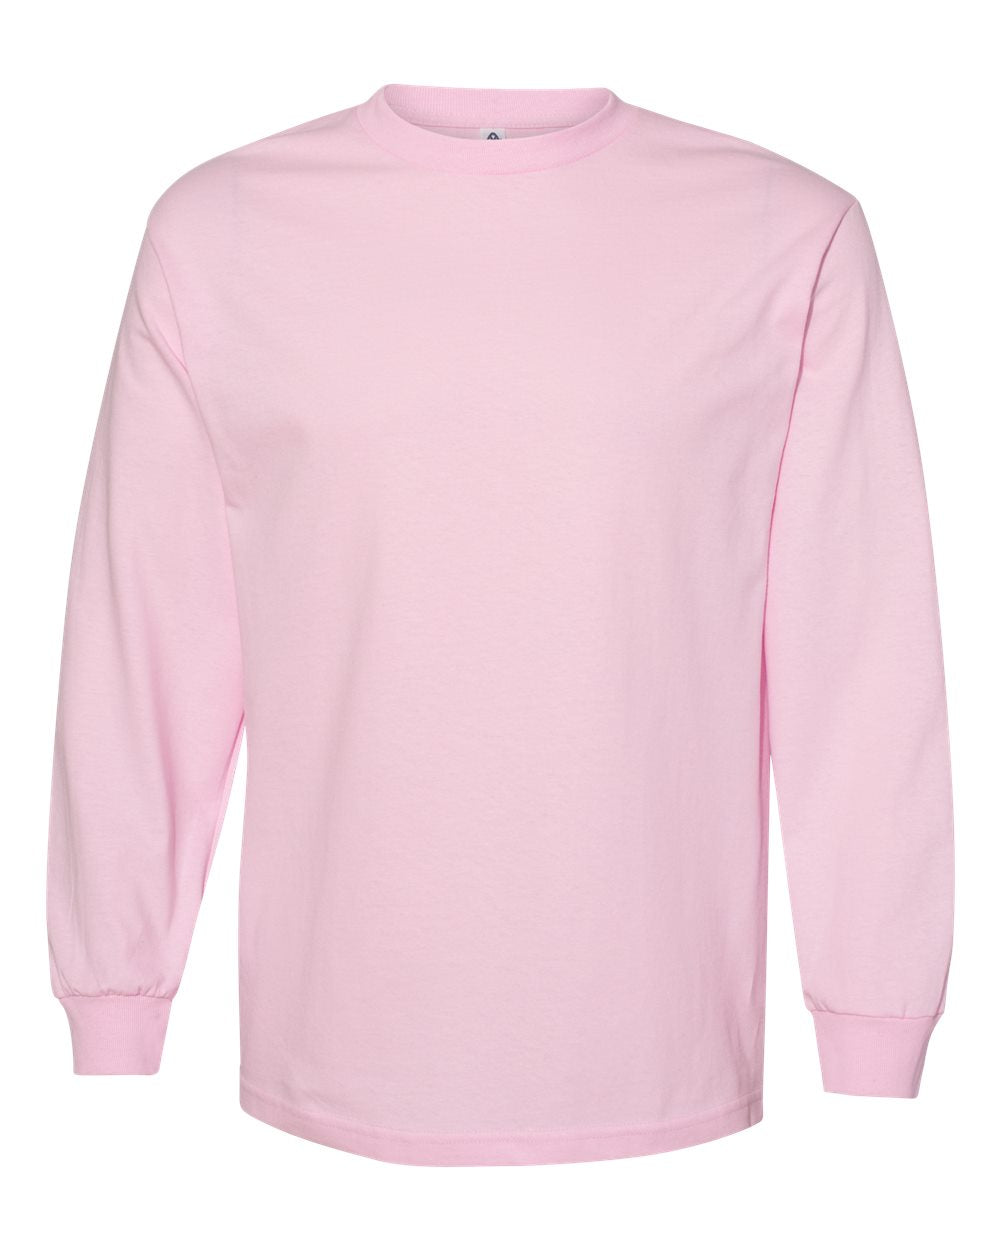 American Apparel Unisex Heavyweight Cotton Long Sleeve Tee 1304 #color_Pink